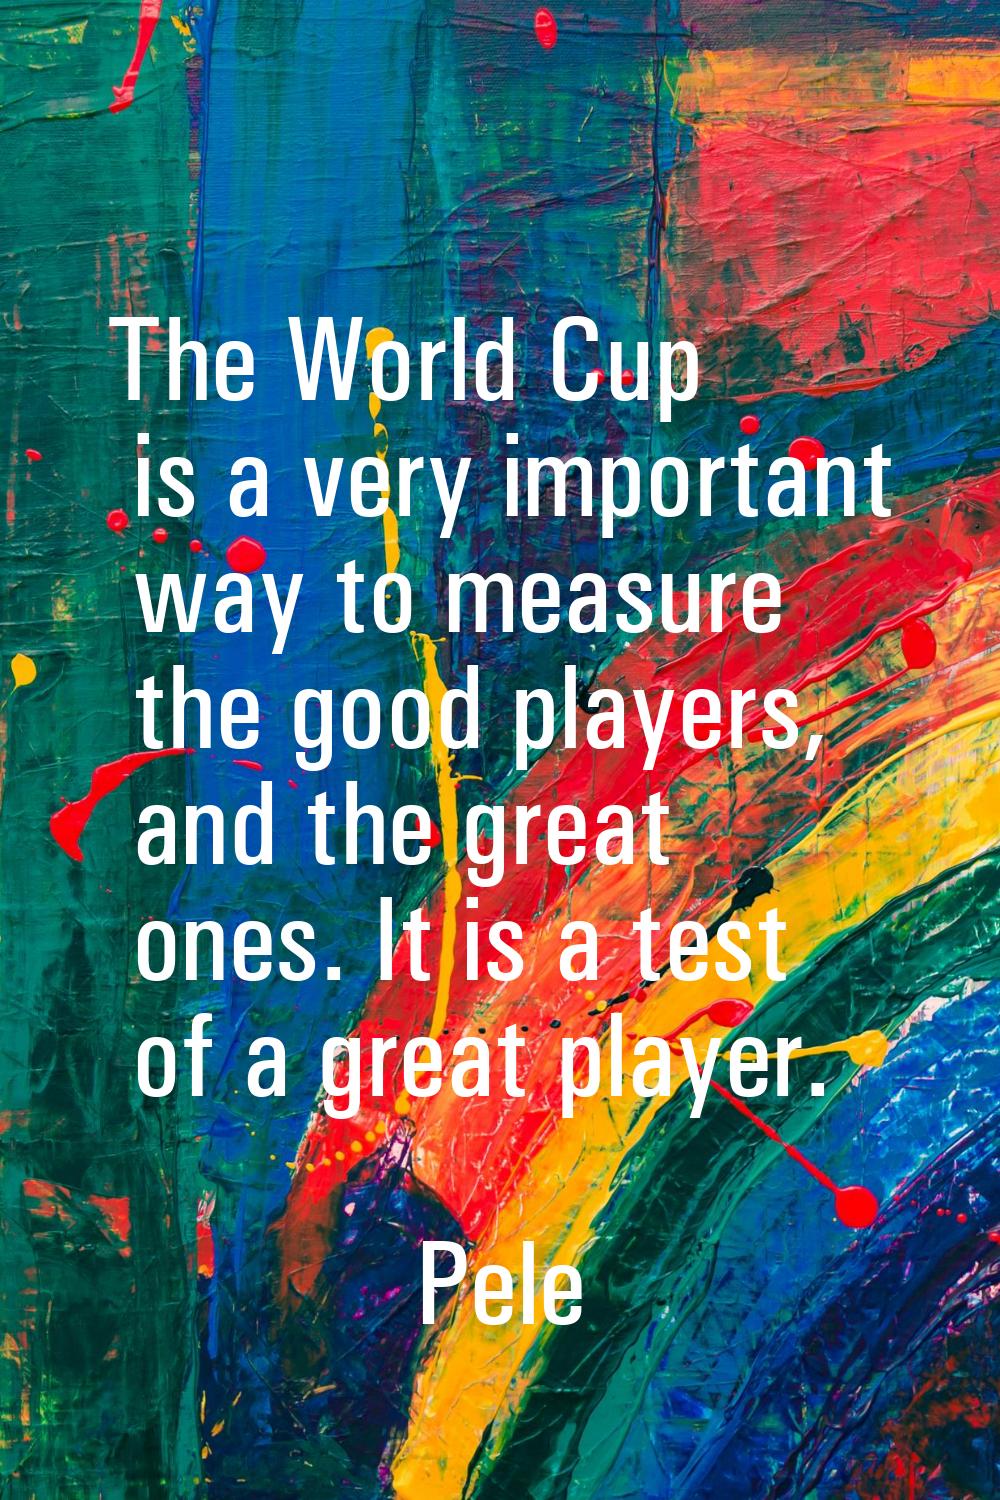 The World Cup is a very important way to measure the good players, and the great ones. It is a test